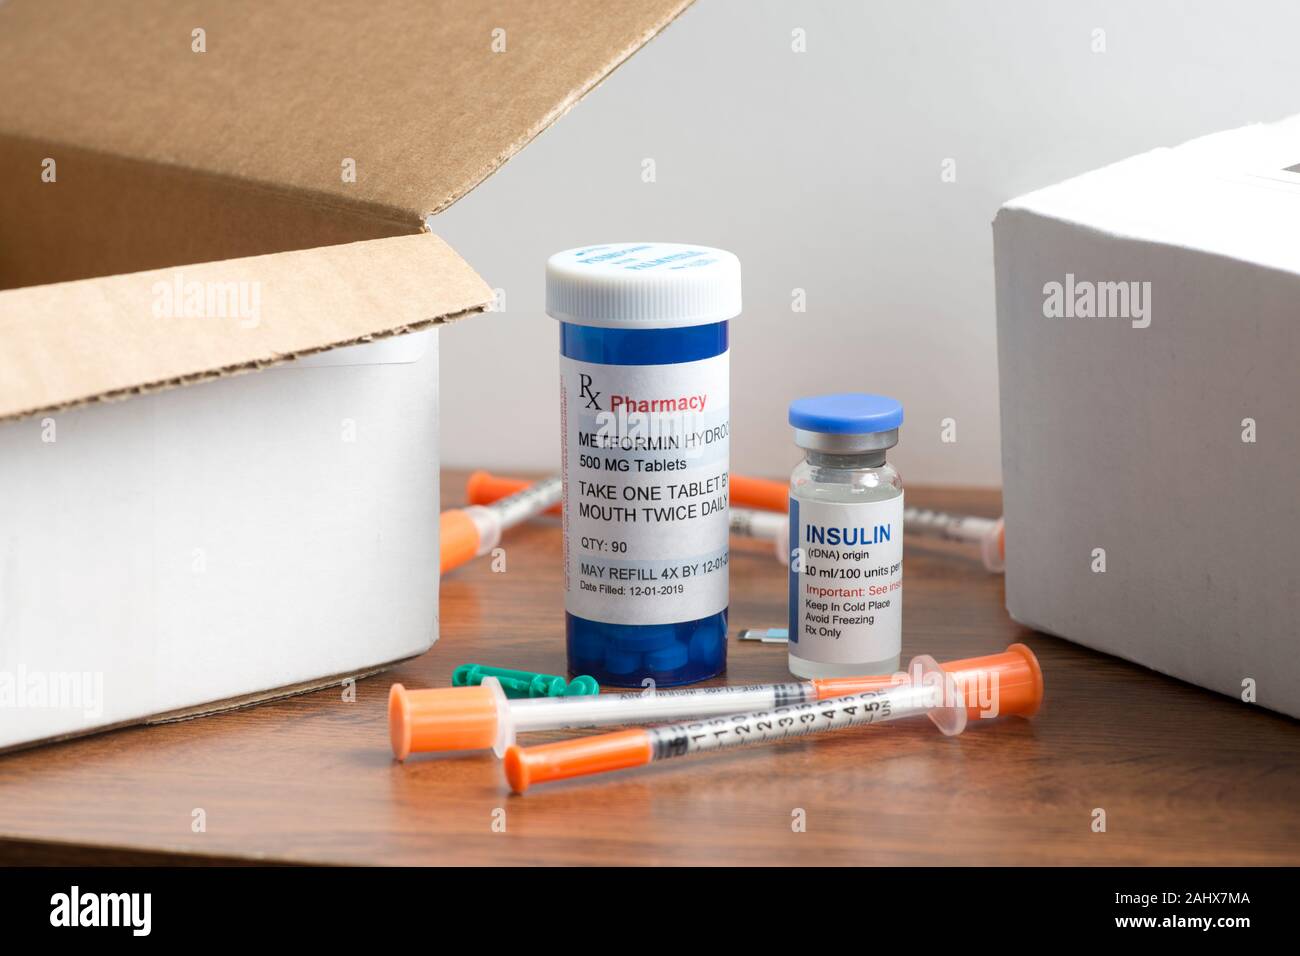 Insulin vial and Metformin Hydrochloride prescription bottle with syringes, test strips and other diabetic medical supplies and mailing postal boxes. Stock Photo